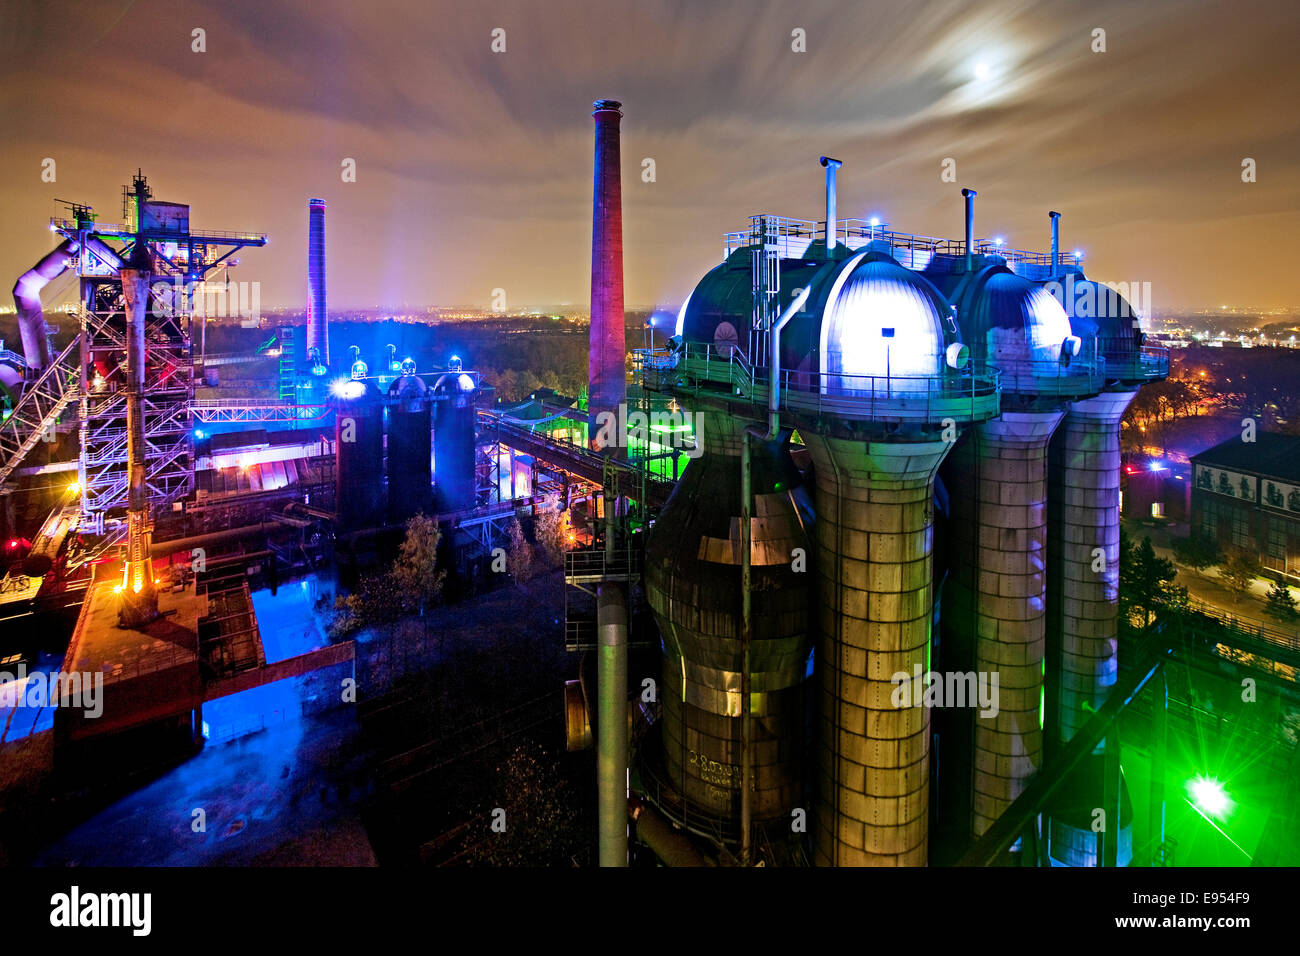 Landschaftspark Duisburg-Nord, public park on a former industrial site, illuminated at night with a full moon Stock Photo